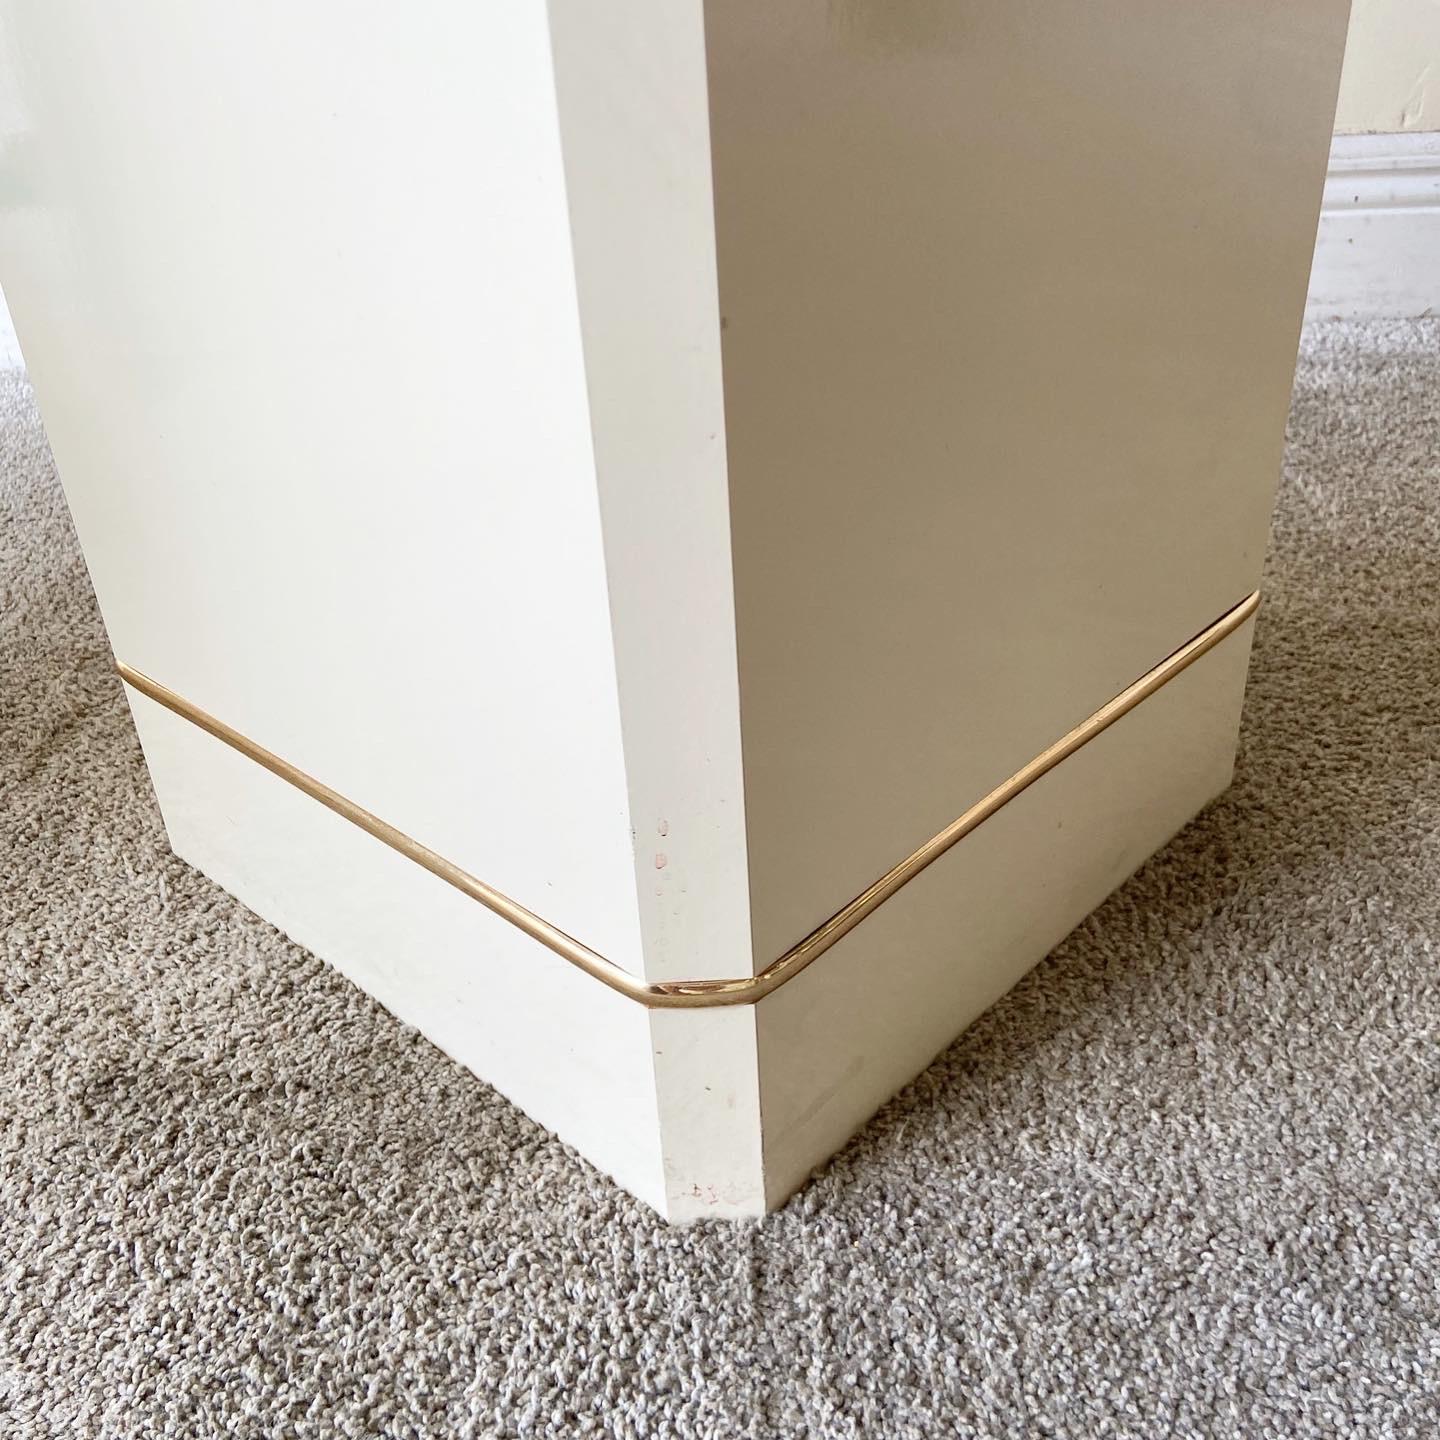 American Postmodern Cream Mirror Top Side Tables with Gold Trim, a Pair